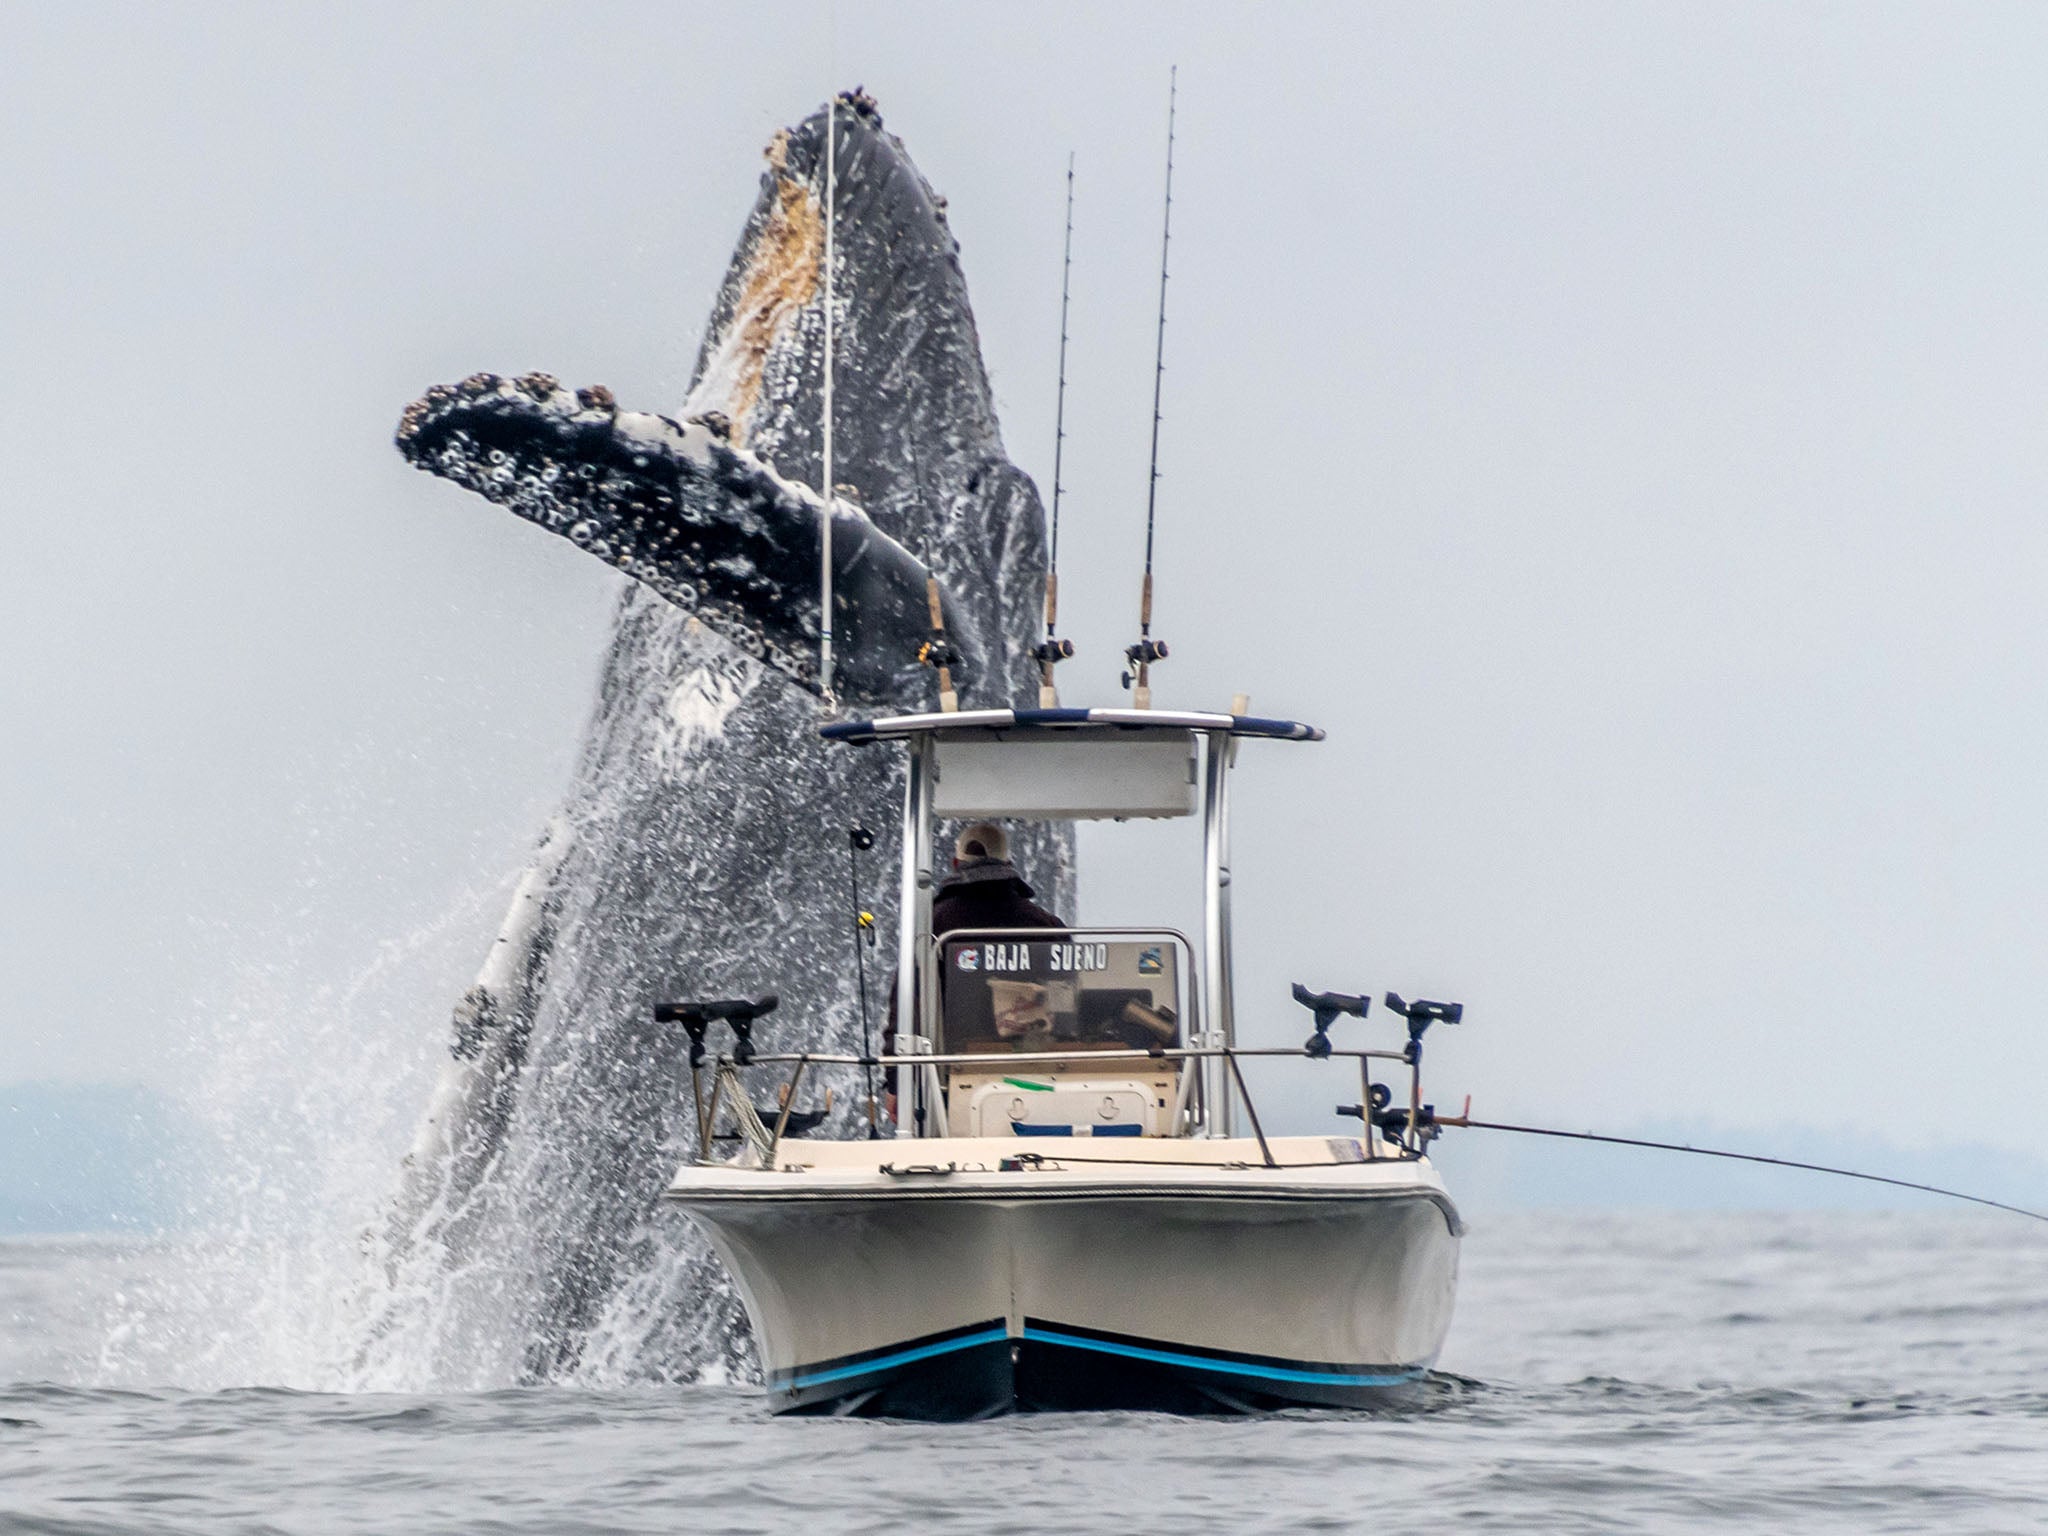 Humpback Whale Narrowly Misses Fishing Boat As It Bursts